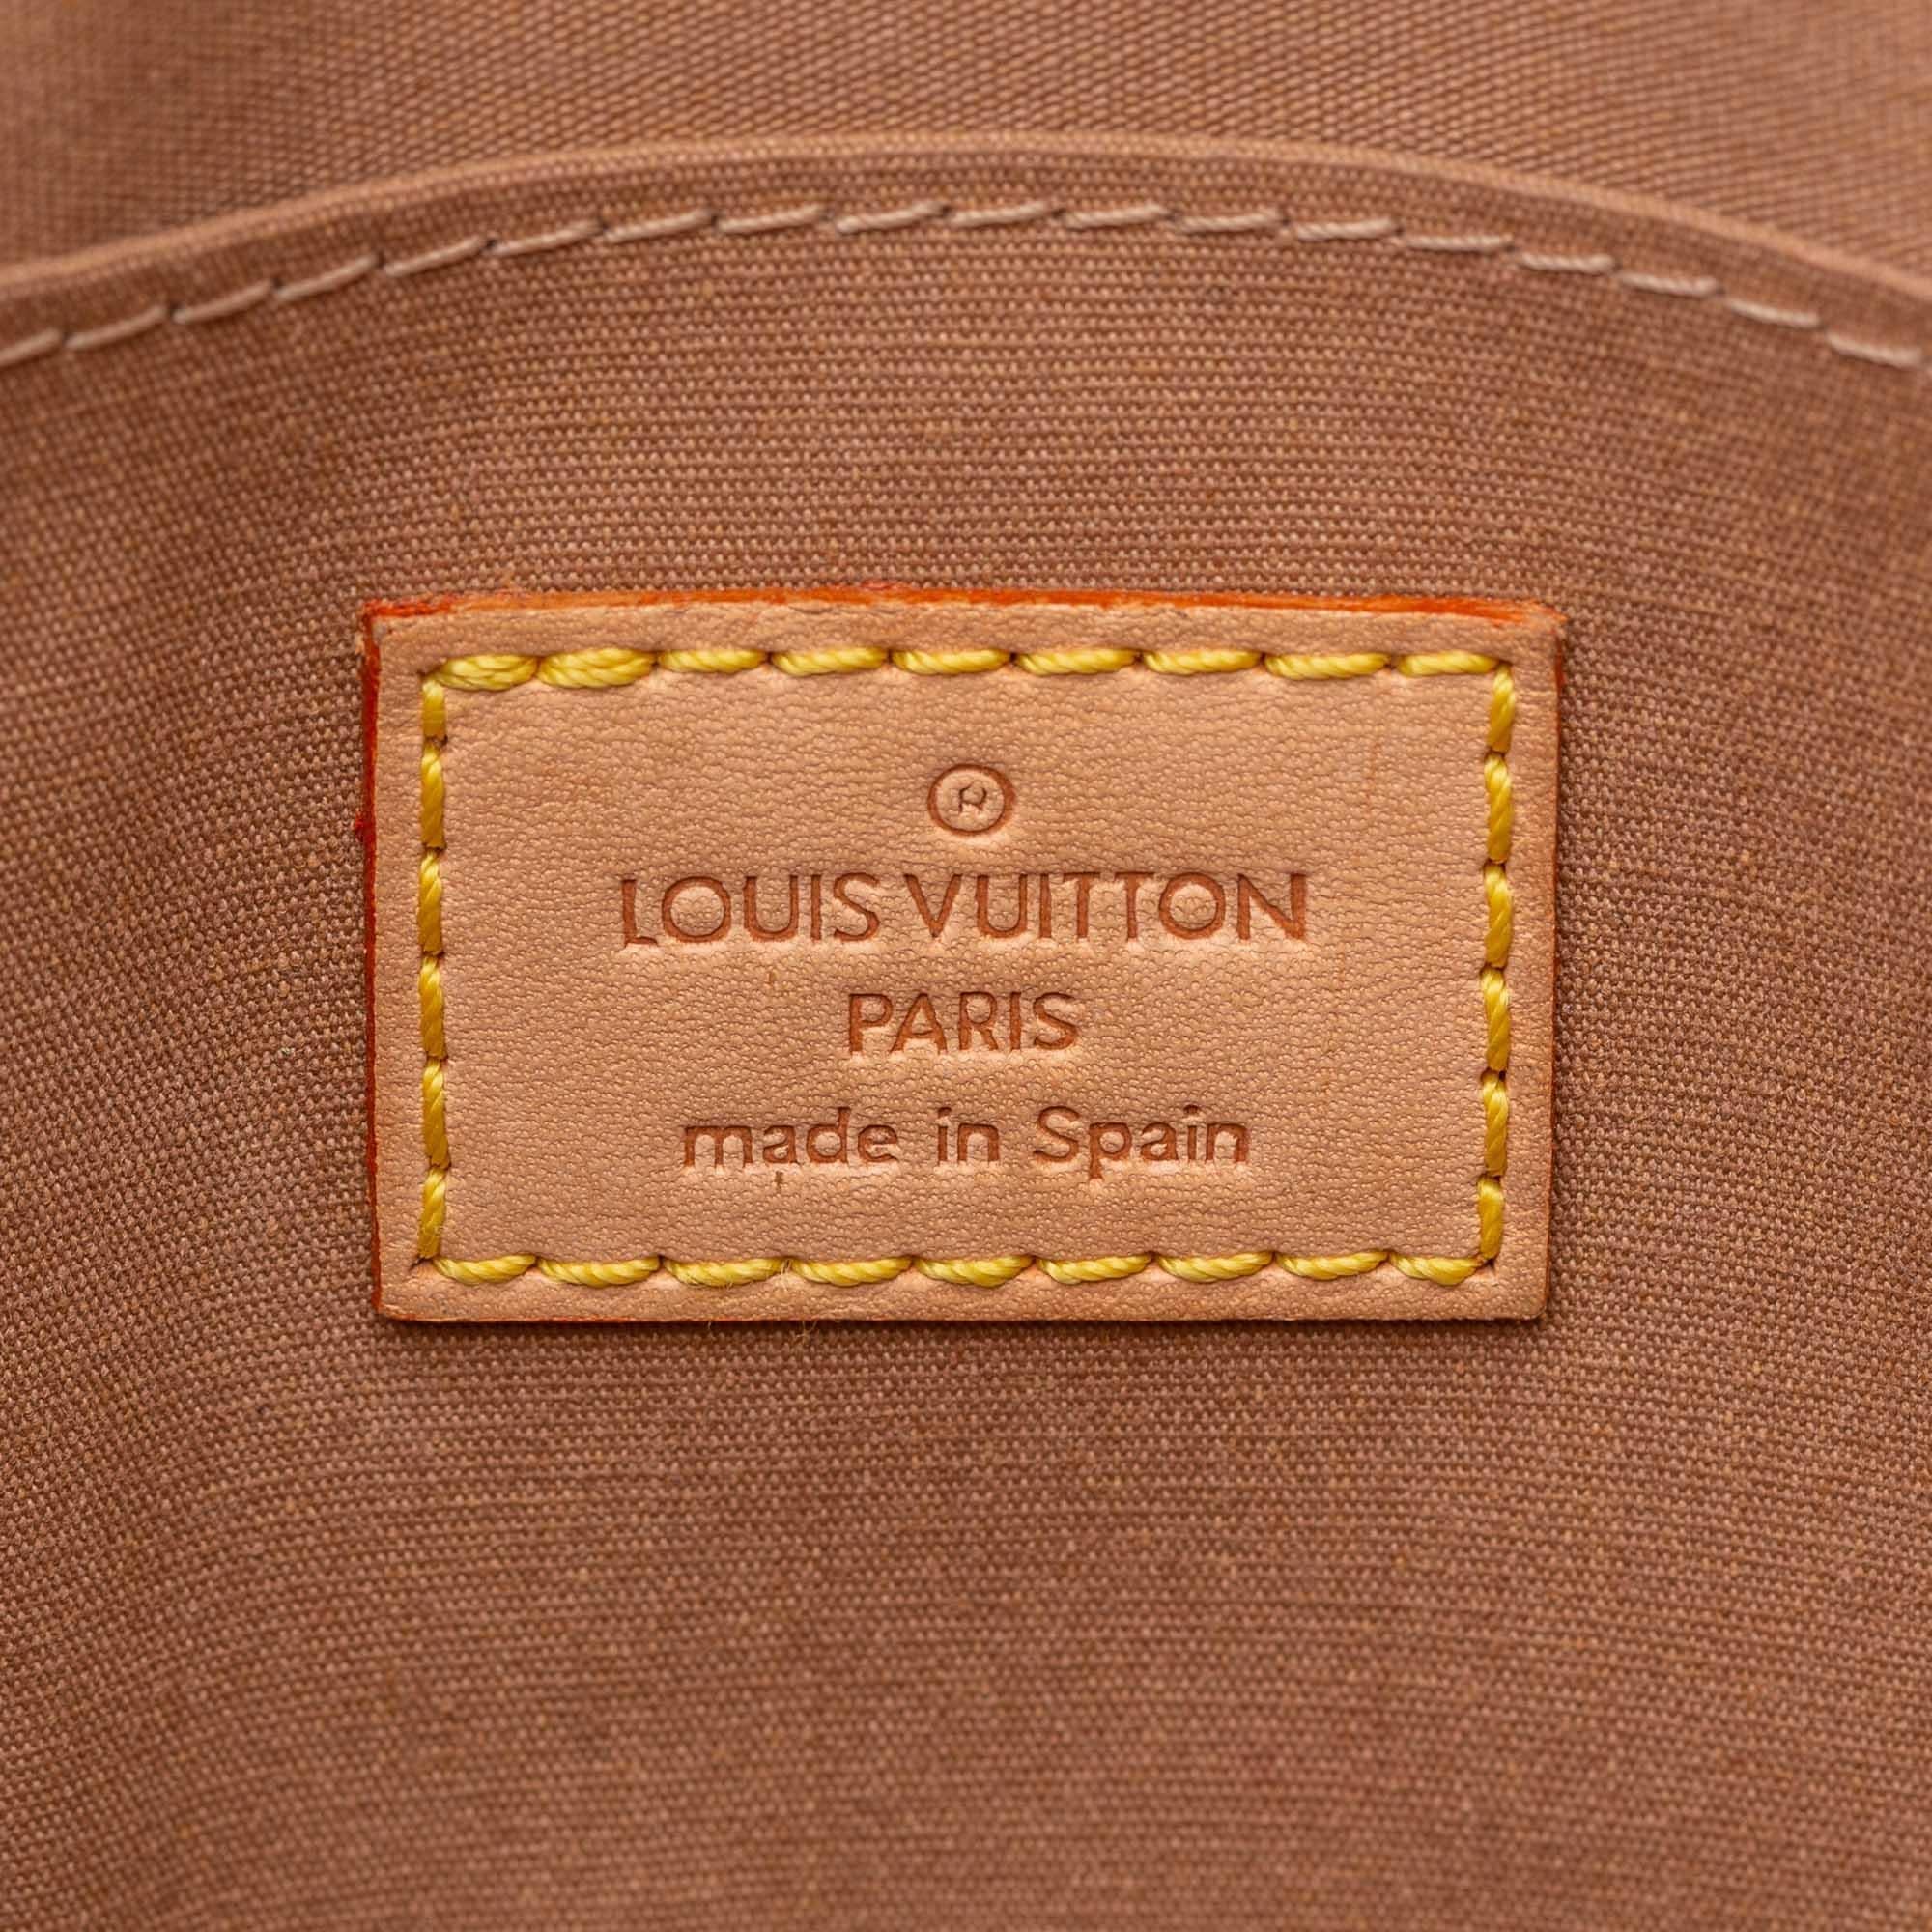 Louis Vuitton Brown Vernis Leather Leather Vernis Maple Drive Spain w/ Dust Bag For Sale 2